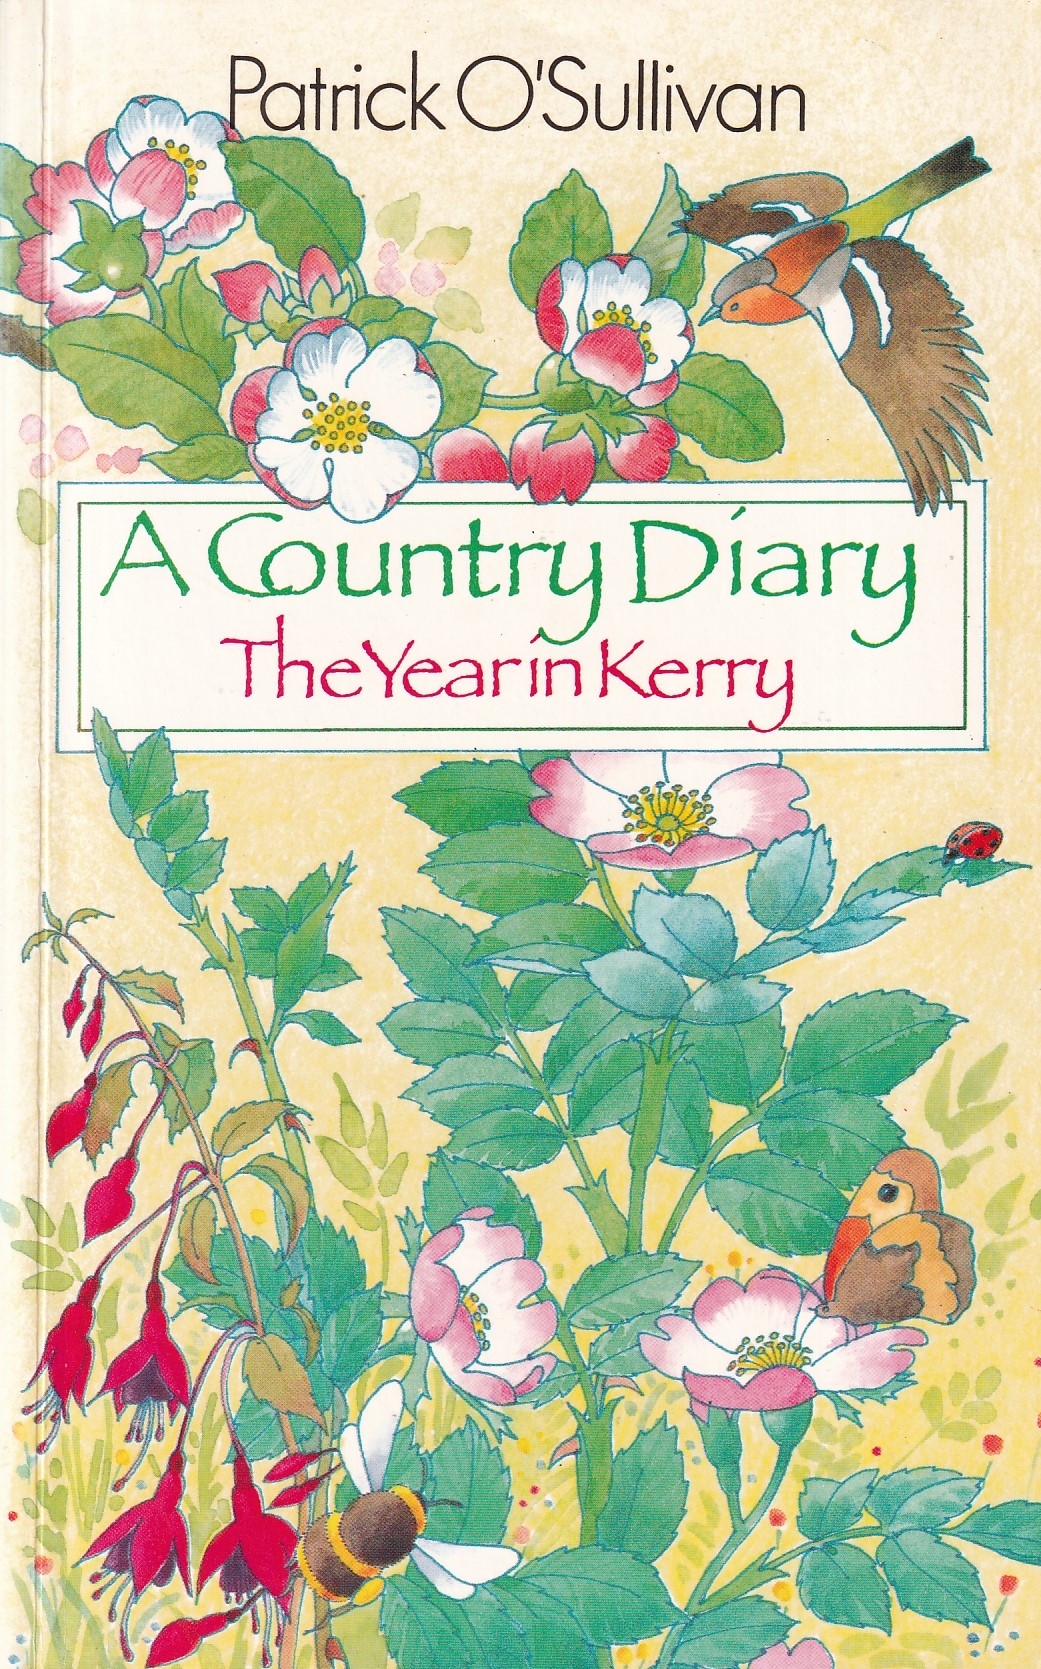 A Country Diary: The Year in Kerry by Patrick O'Sullivan